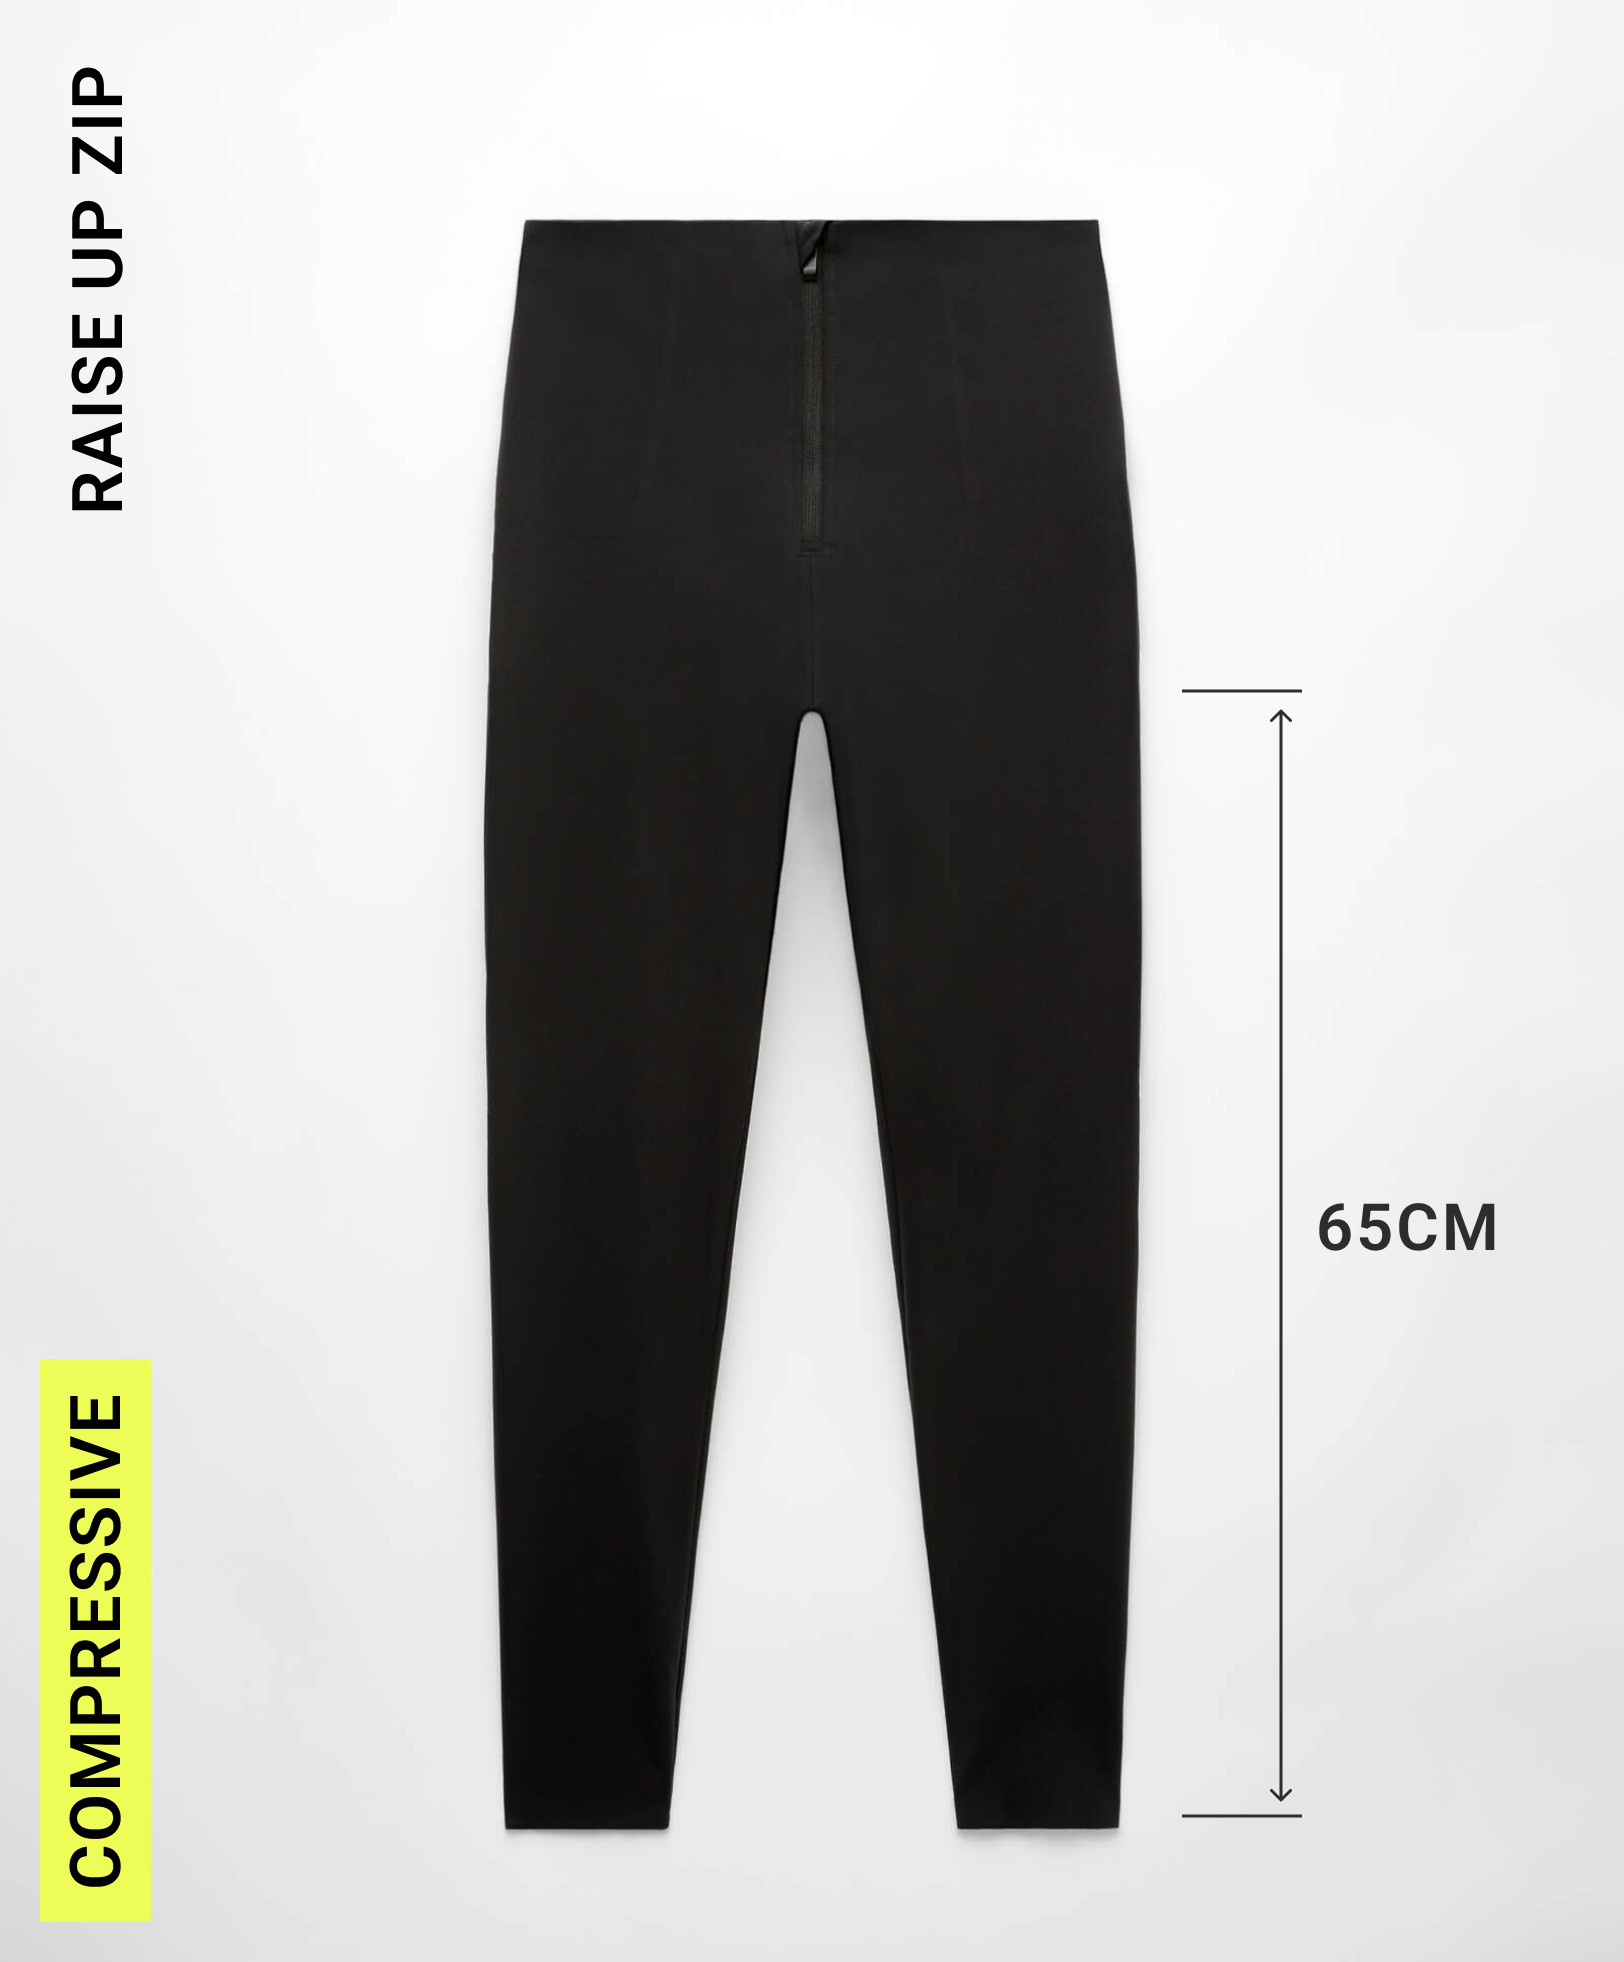 Raise Up compressive super-high-rise ankle-length 65cm leggings with zip